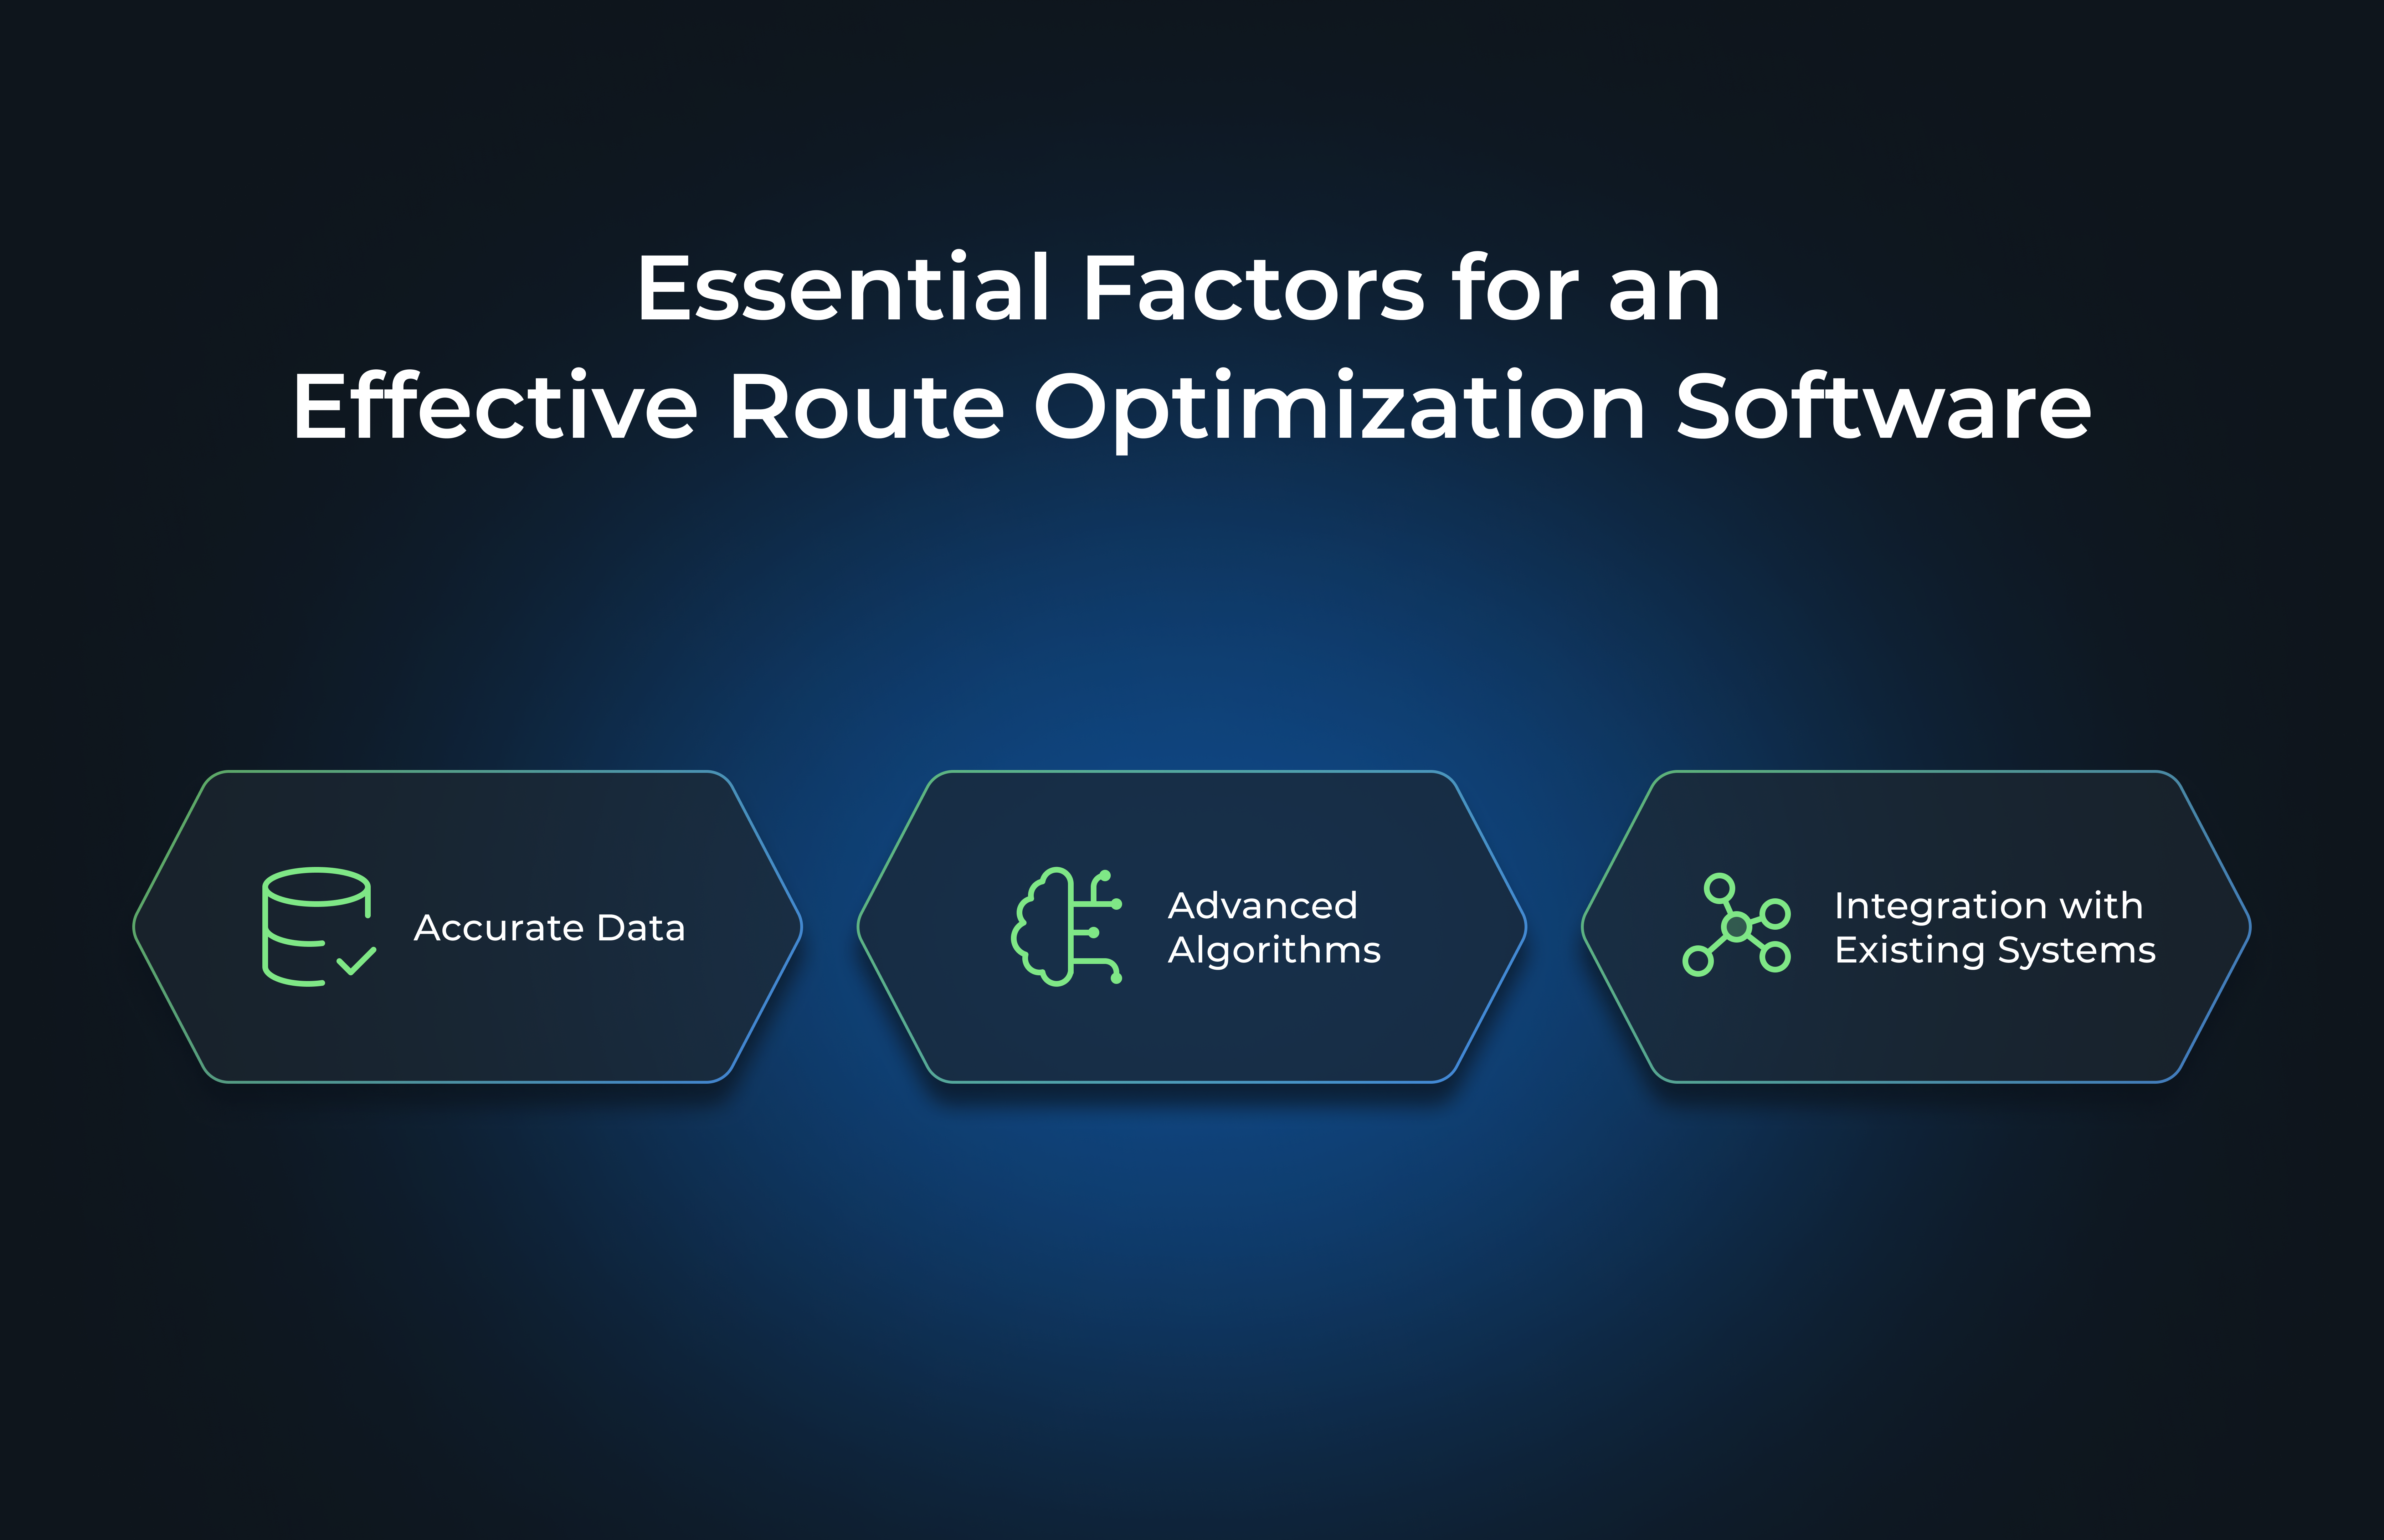 Essential Factors for an Effective Route Optimization Software: Accurate Data, Advanced Algorithms, Integration with Existing Systems

